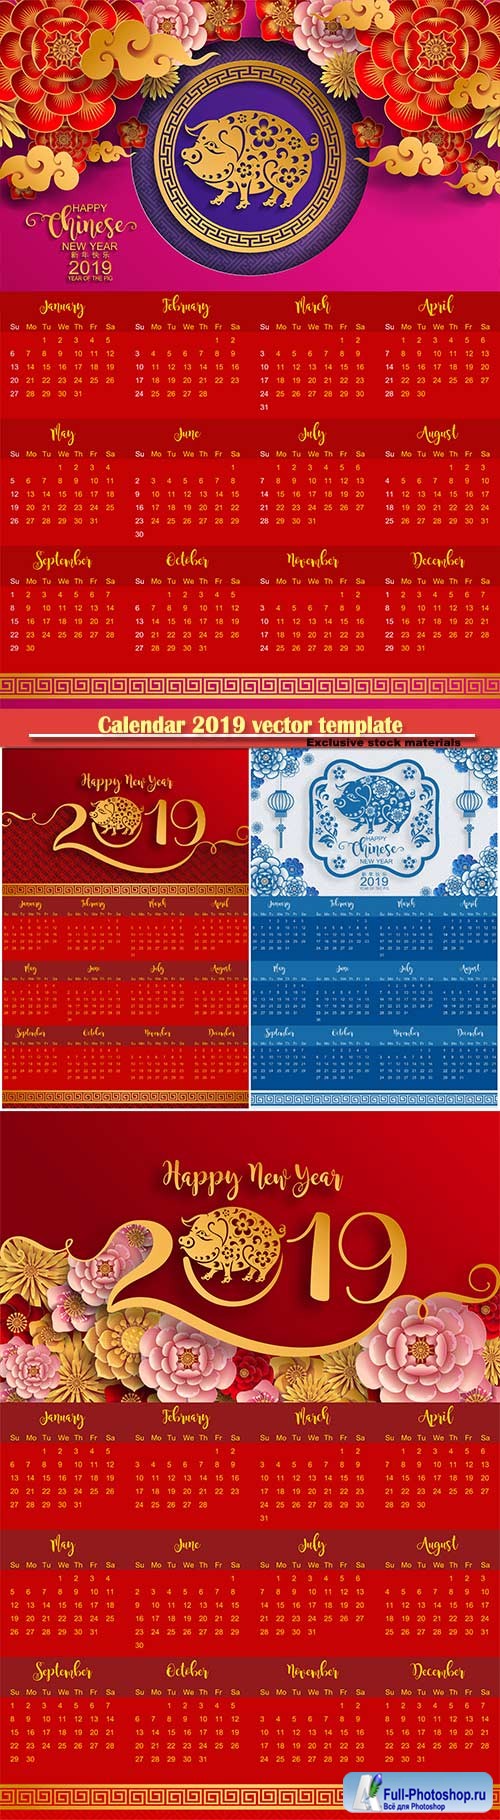 Calendar 2019 vector template, 12 months included